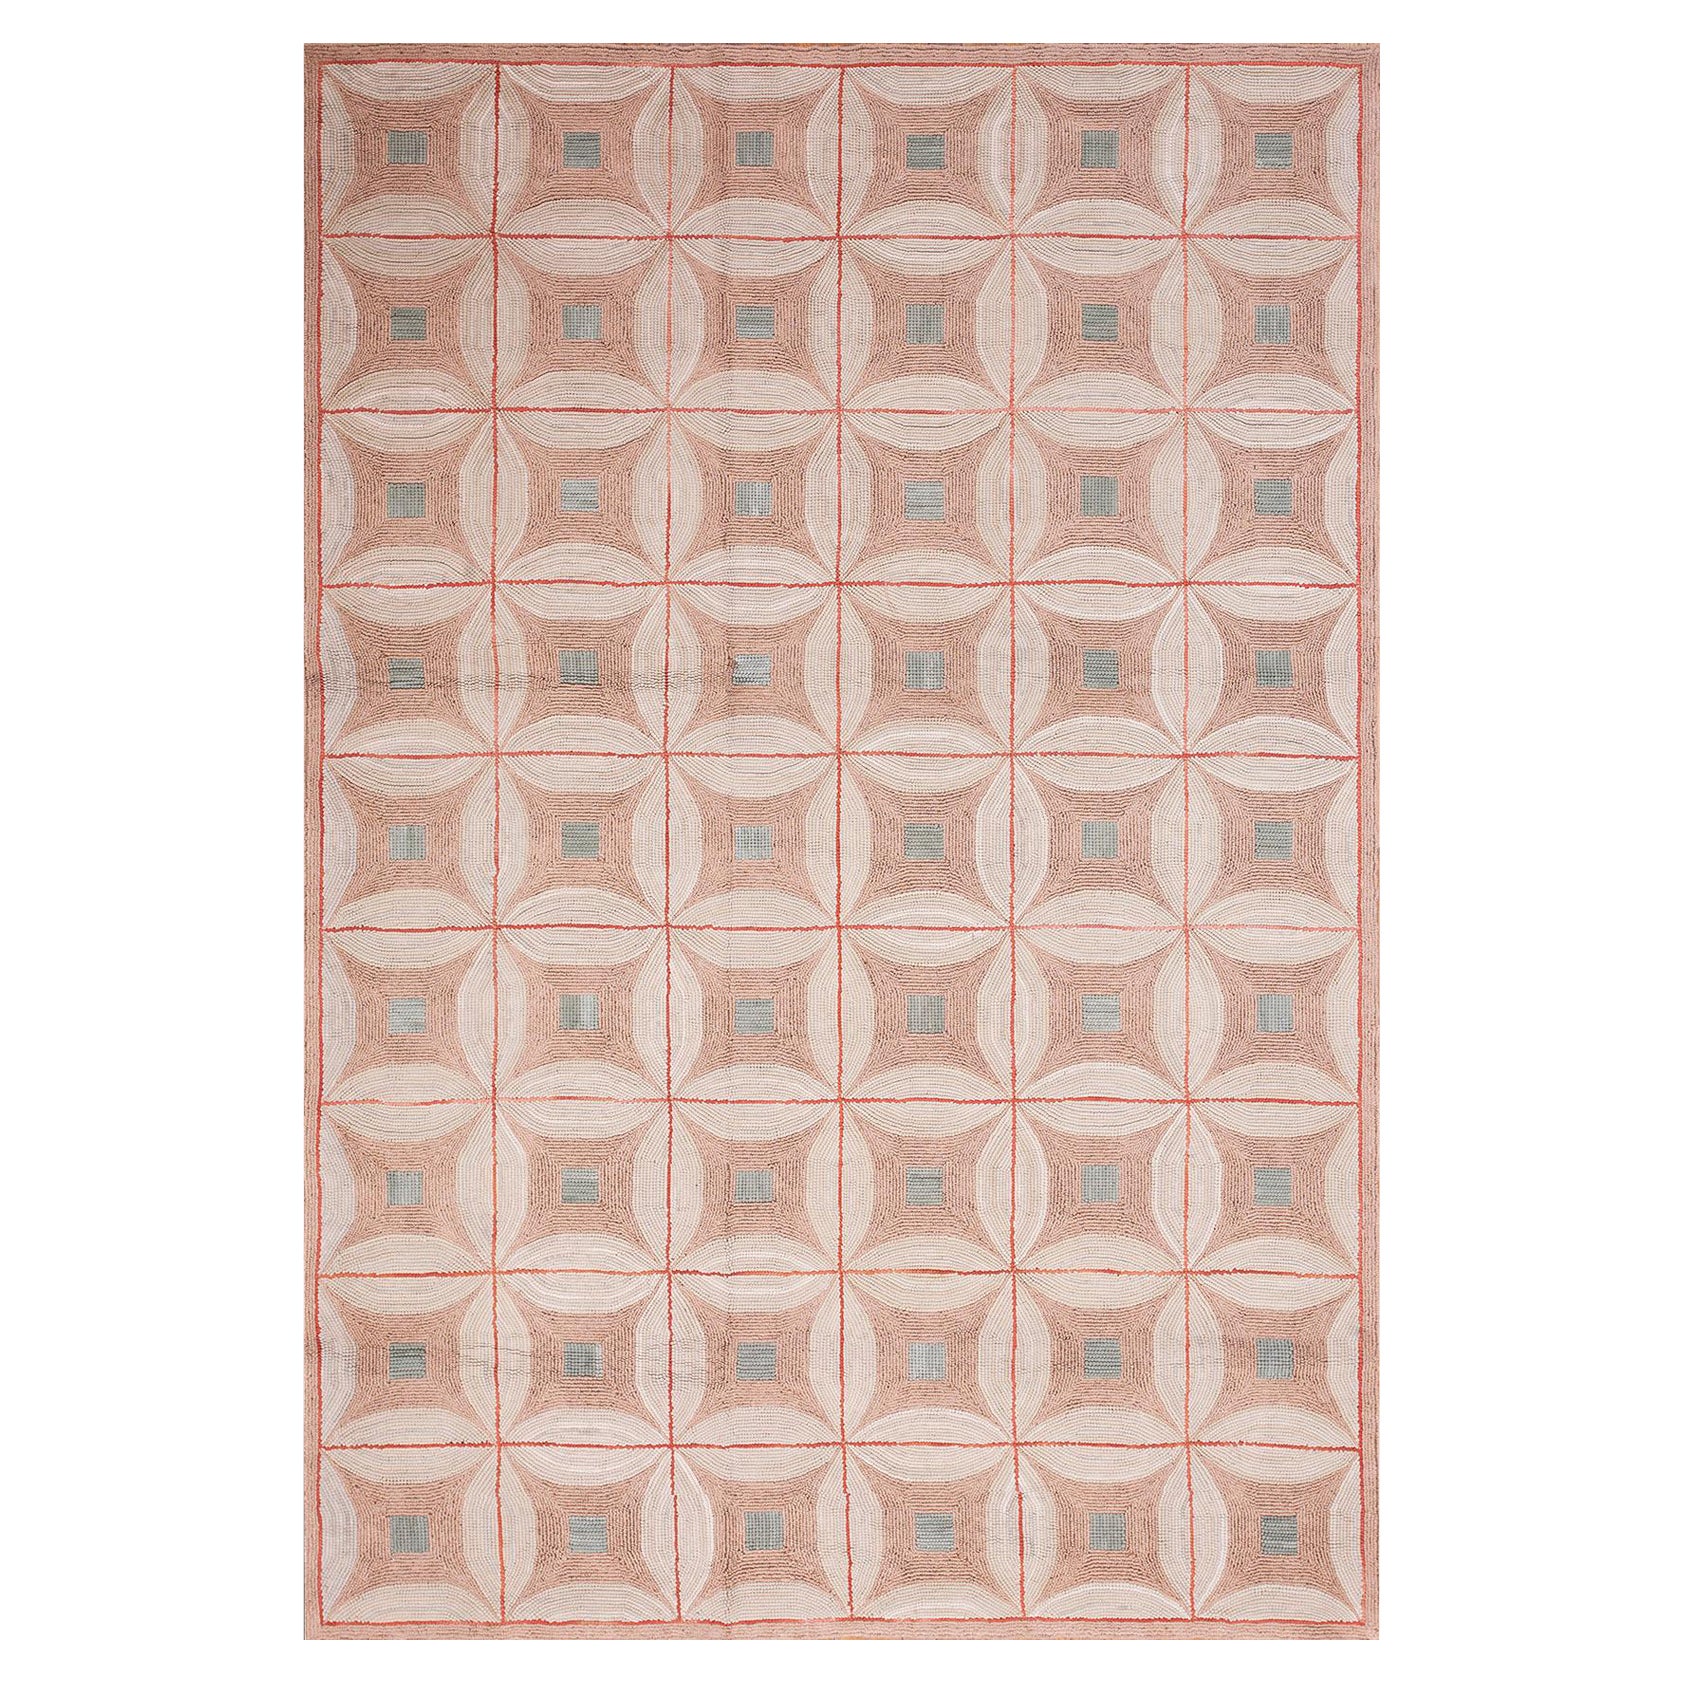 Contemporary American Hooked Rug (6' x 9' - 182x 274) For Sale